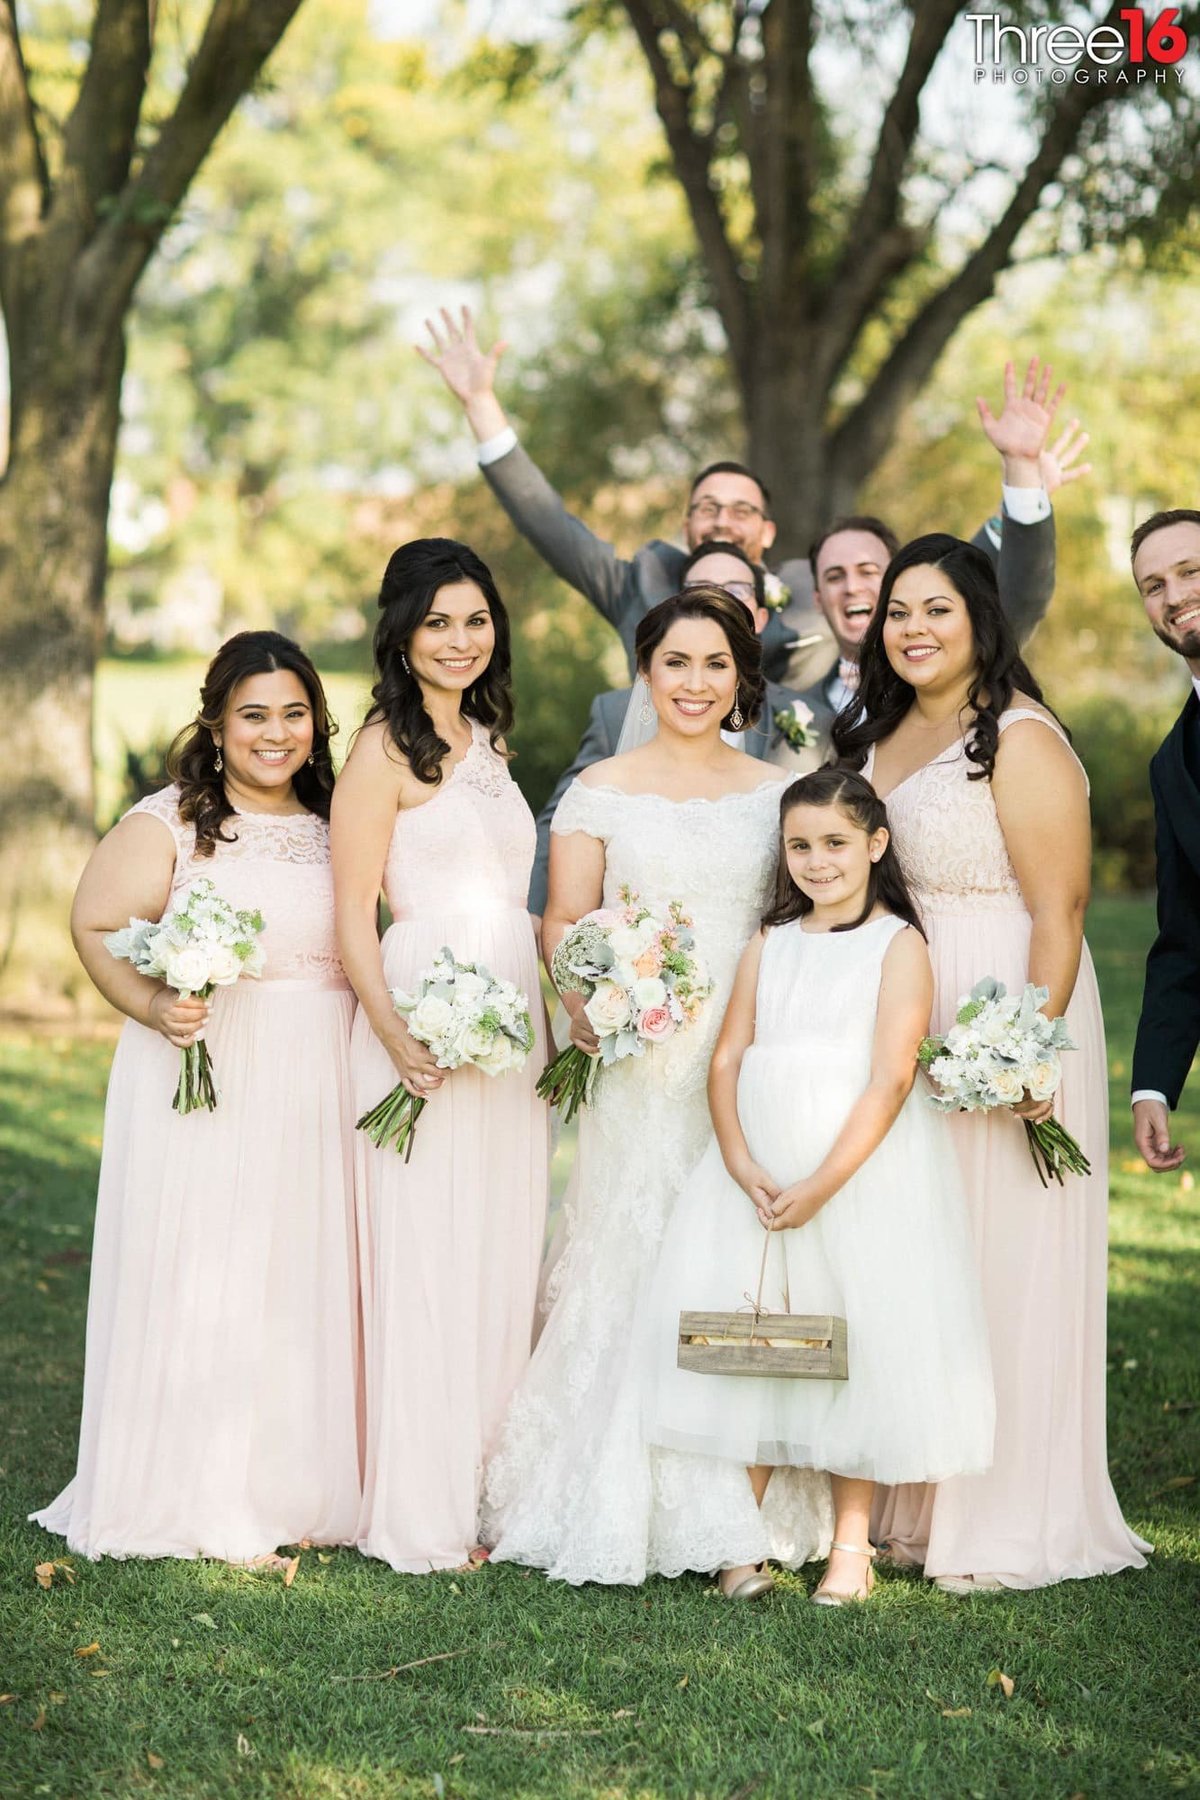 Groomsmen photobomb Bride as she poses with her Bridesmaids and Flower Girl